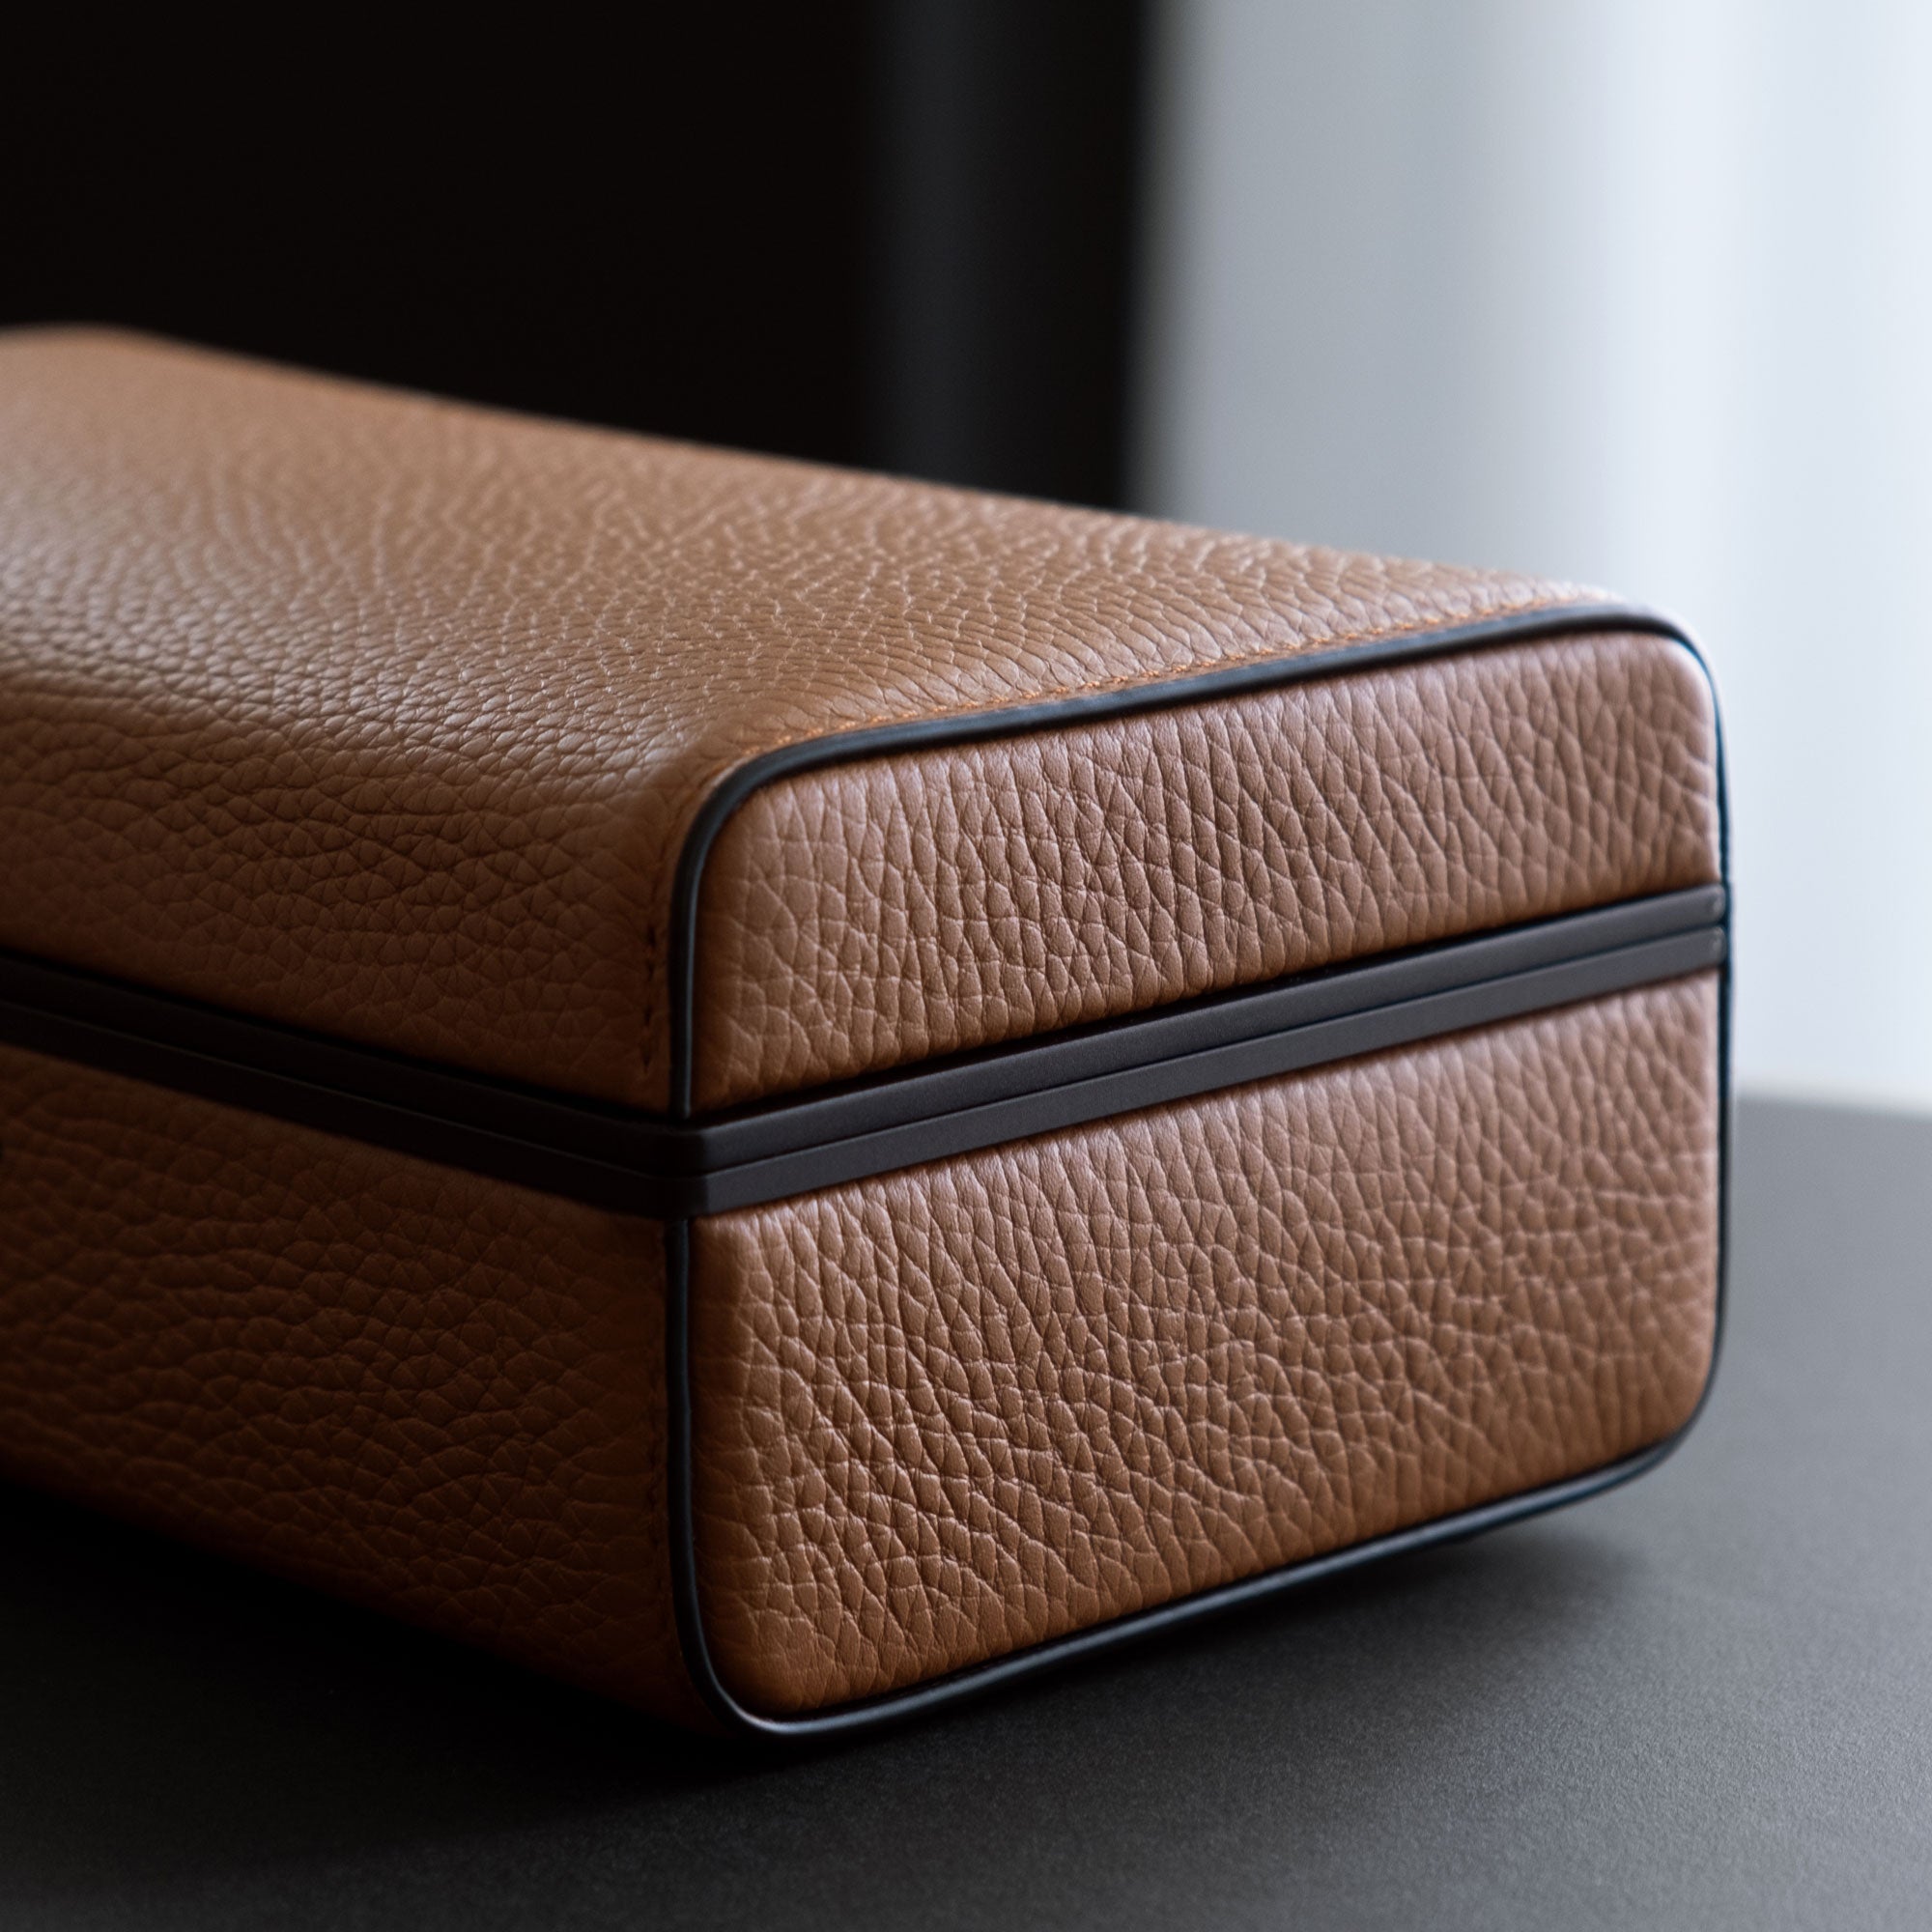 Detail shot of closed Eaton 3 watch case showing the black carbon fiber and anodized aluminum frame and tan French leather